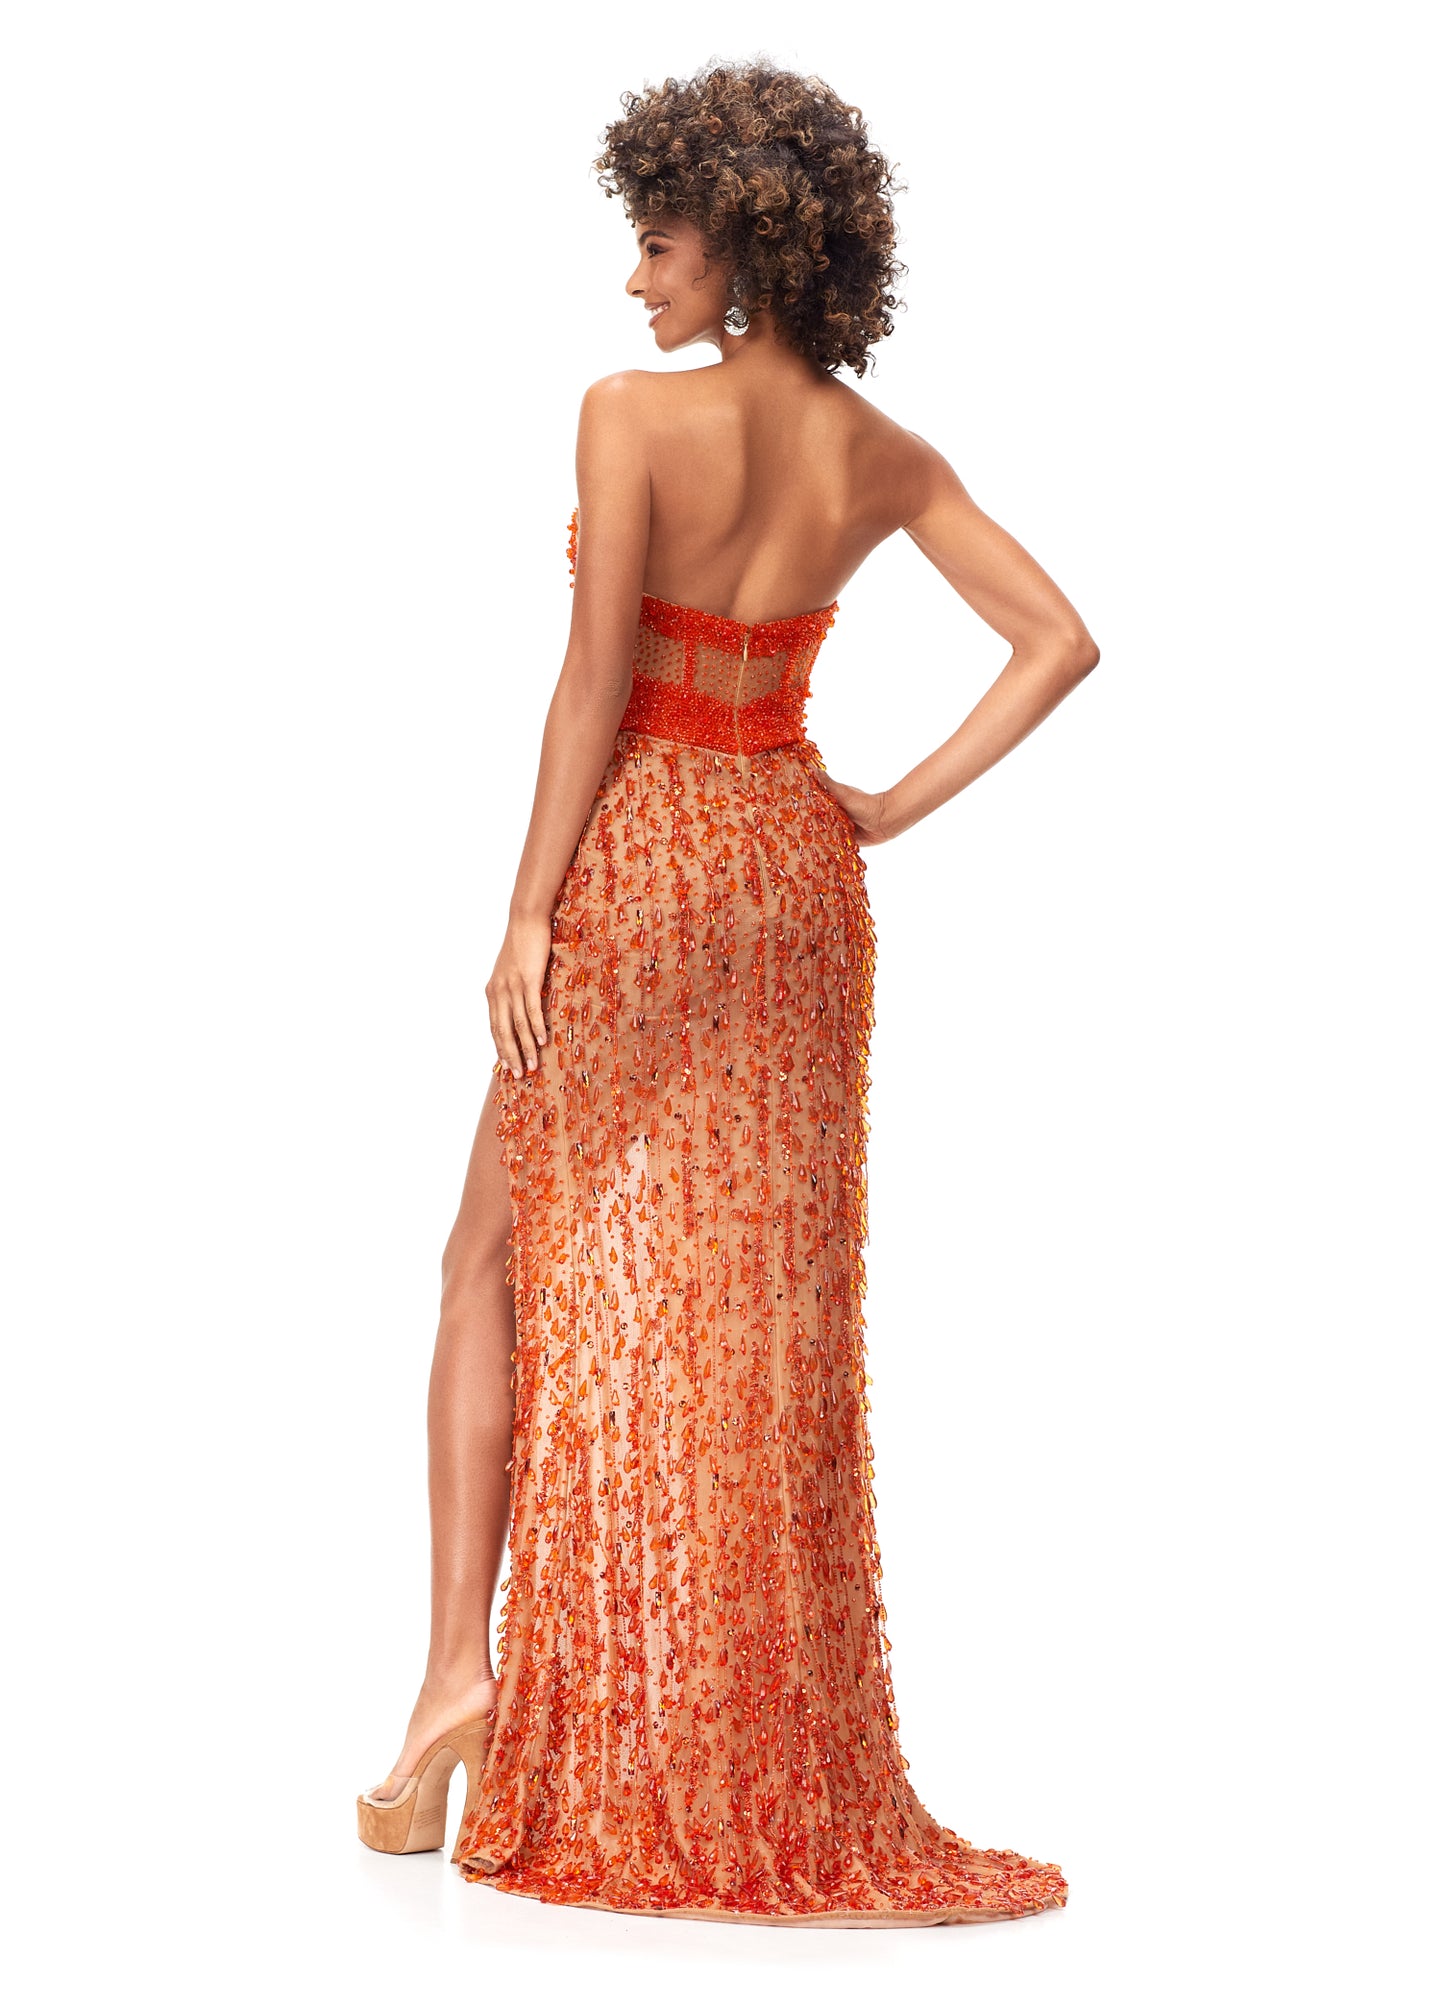 Ashley Lauren 11275 This stunning strapless evening gown features an illusion corset bustier embellished with beading. The fitted skirt is complete with fringe and a left leg slit. Sweetheart Neckline Illusion Corset Bustier Left Leg Slit Fringe COLOR: Orange